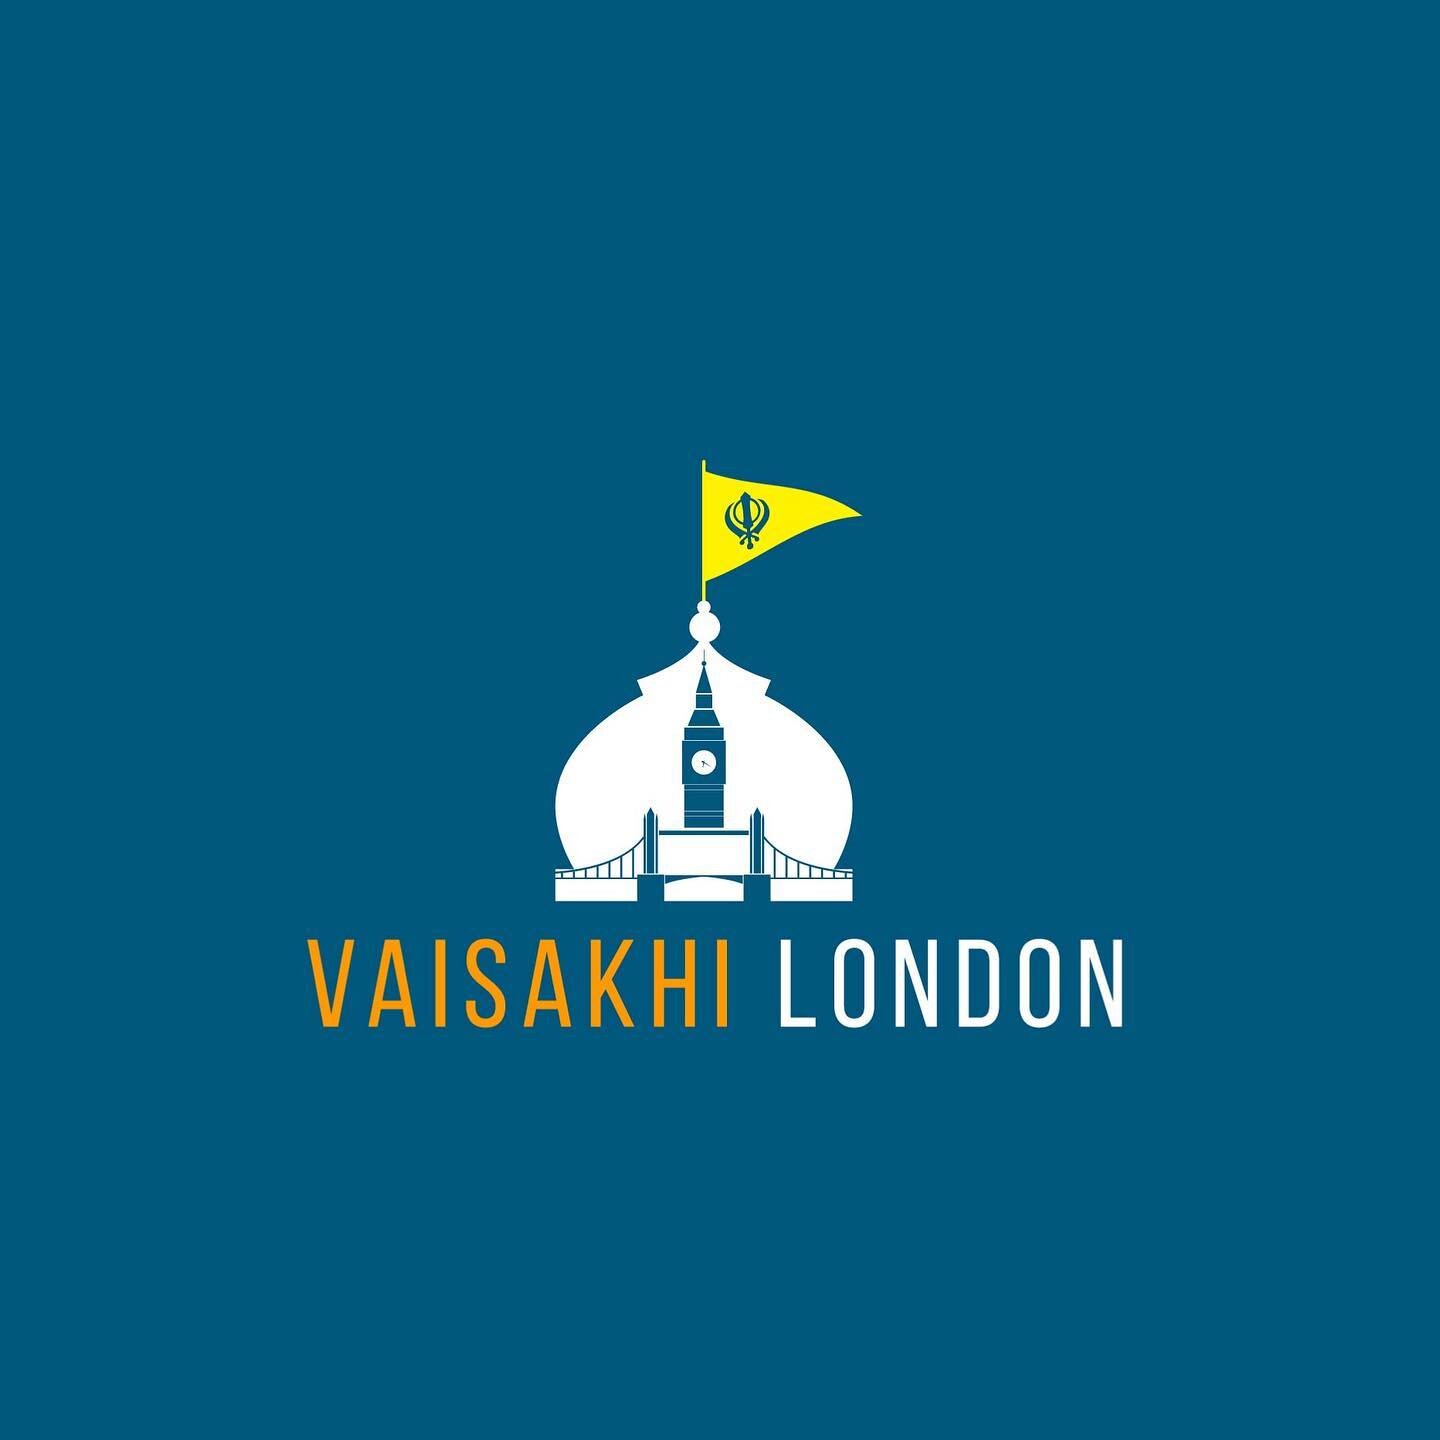 Welcome to the Instagram page of Vaisakhi London 🙏🏼

We look forward to welcoming you all to Trafalgar Square on Saturday 16th April, 2022 for the Vaisakhi festival, a celebration of Sikh and Punjabi tradition, heritage and culture. 

Follow us on 